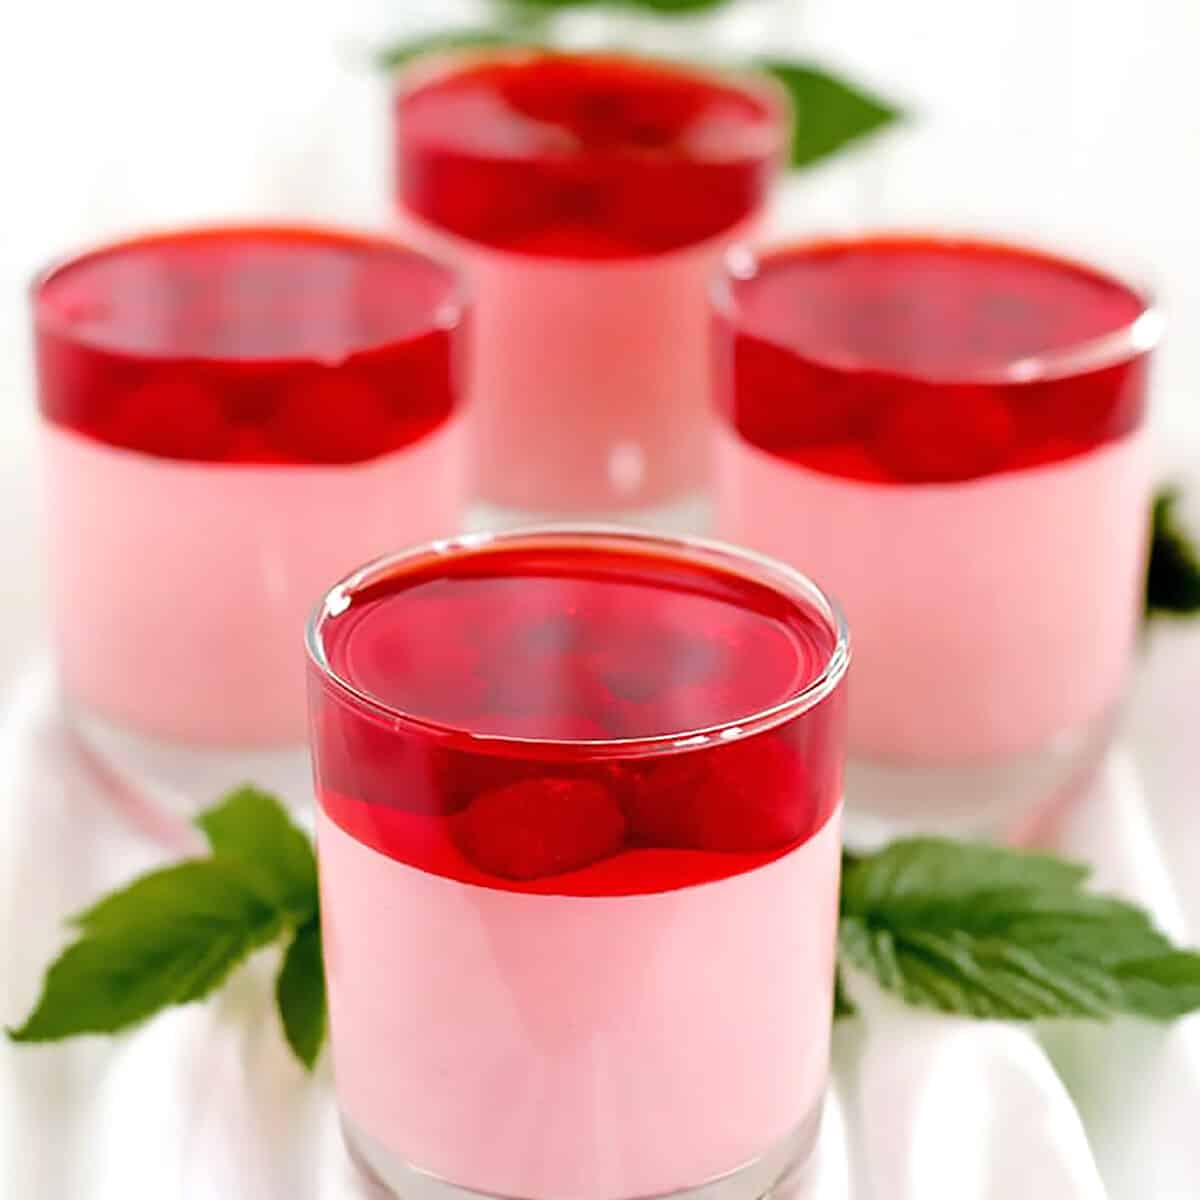 These delicious Greek Yogurt Raspberry Jell-O Mousse Dessert cups are very easy to put together but are a great mouth-pleaser. They can easily be made ahead of time and are very attractive on the dessert table.